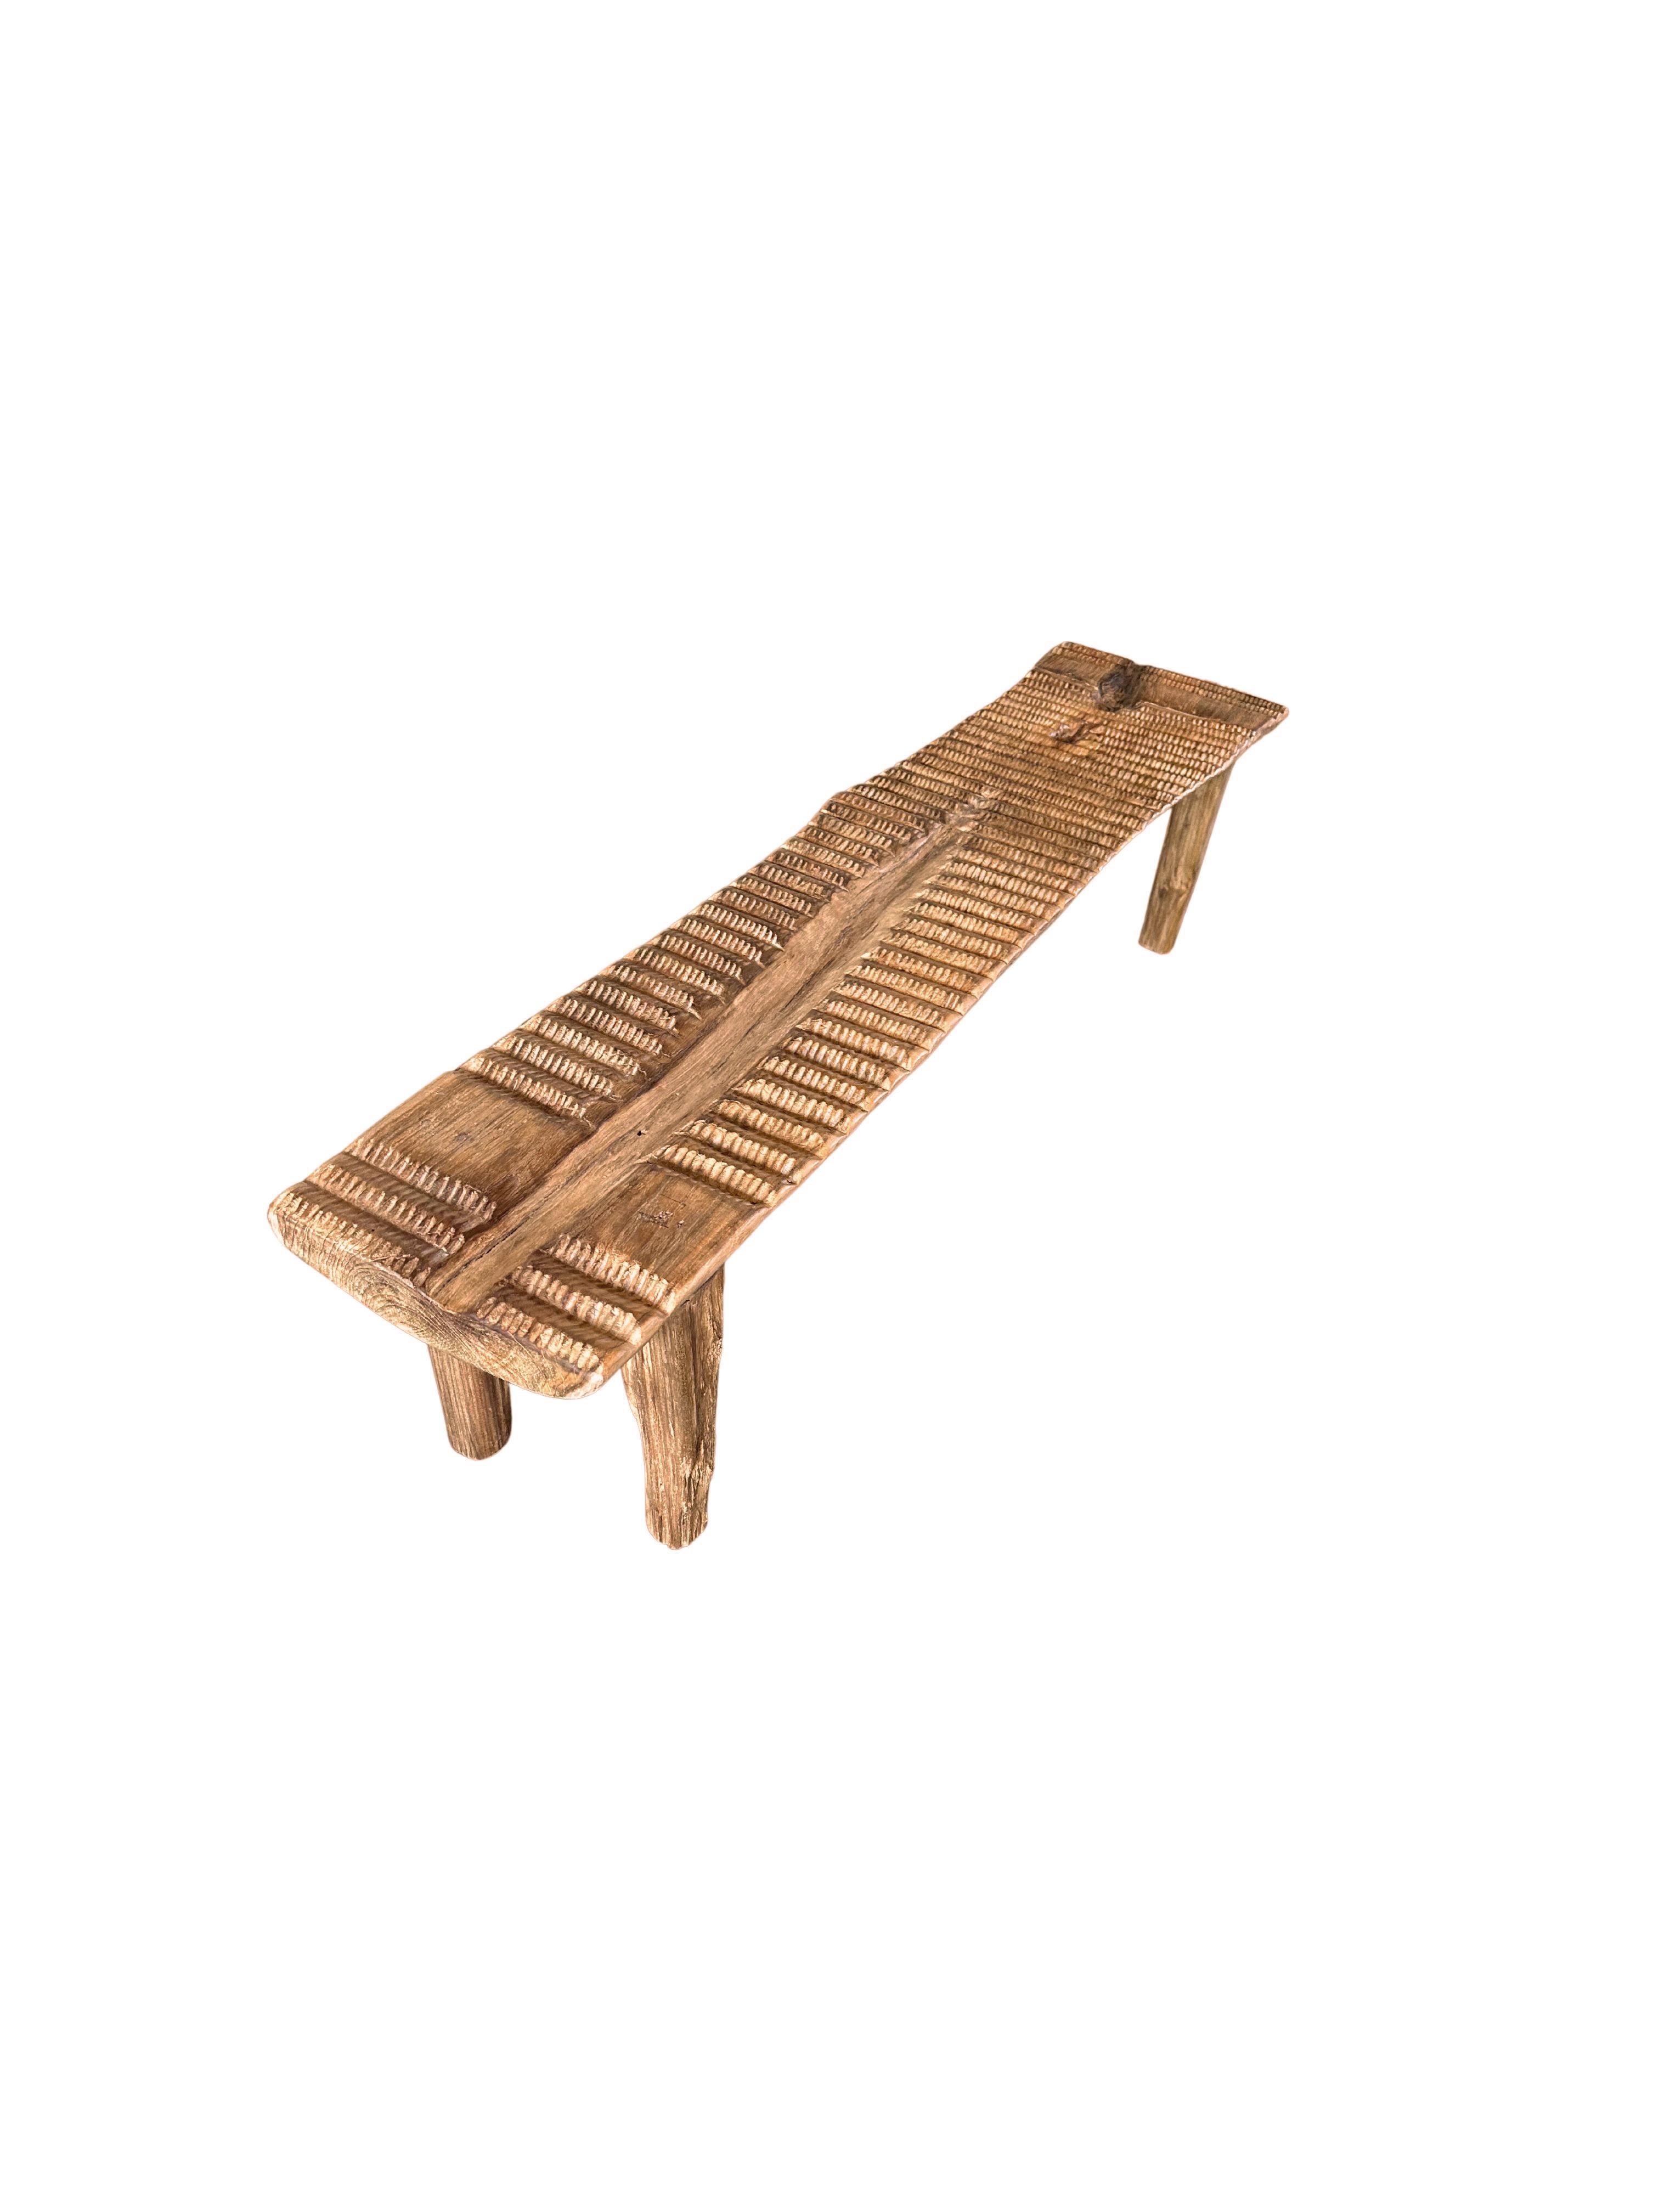 Contemporary Teak Wood Sculptural Long Bench, Carved Detailing, Modern Organic For Sale